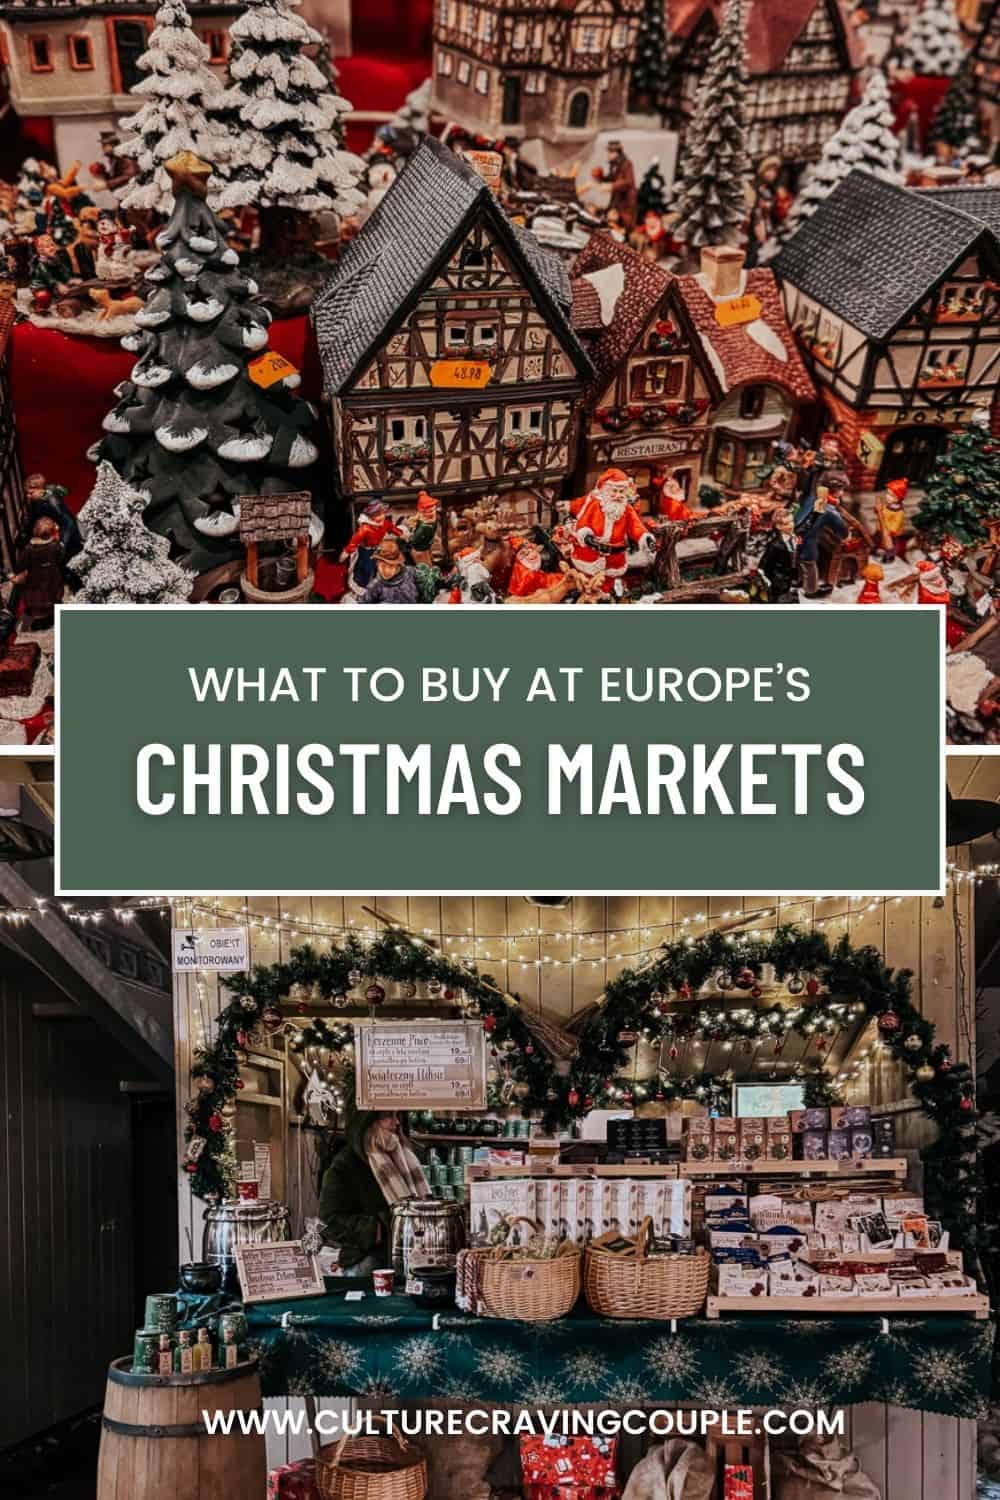 Shopping at Christmas Markets for Memories and Unique Gifts